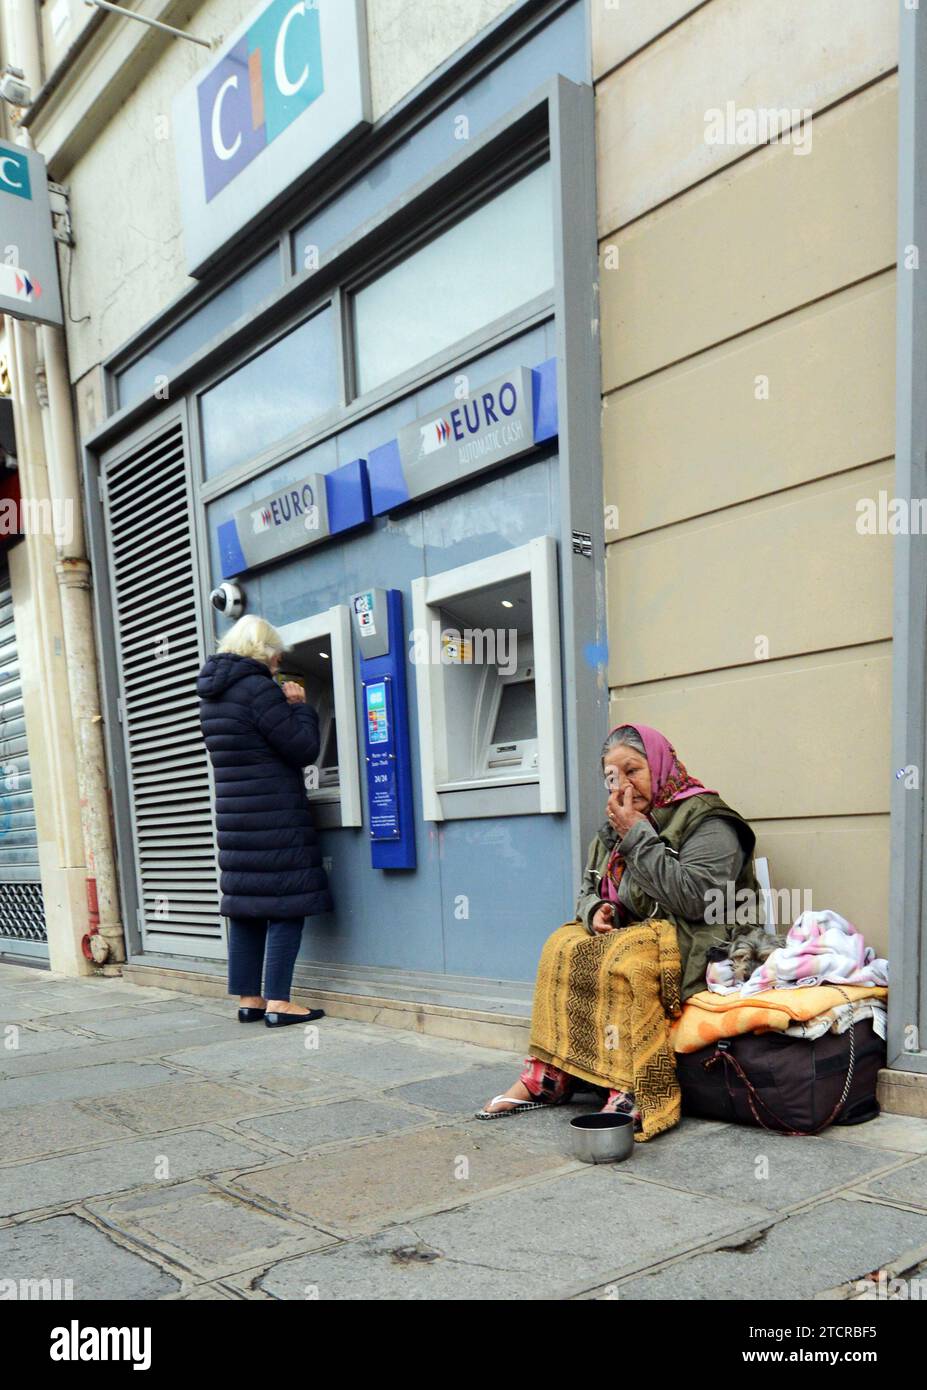 A migrant begging for money in Paris, France. Stock Photo